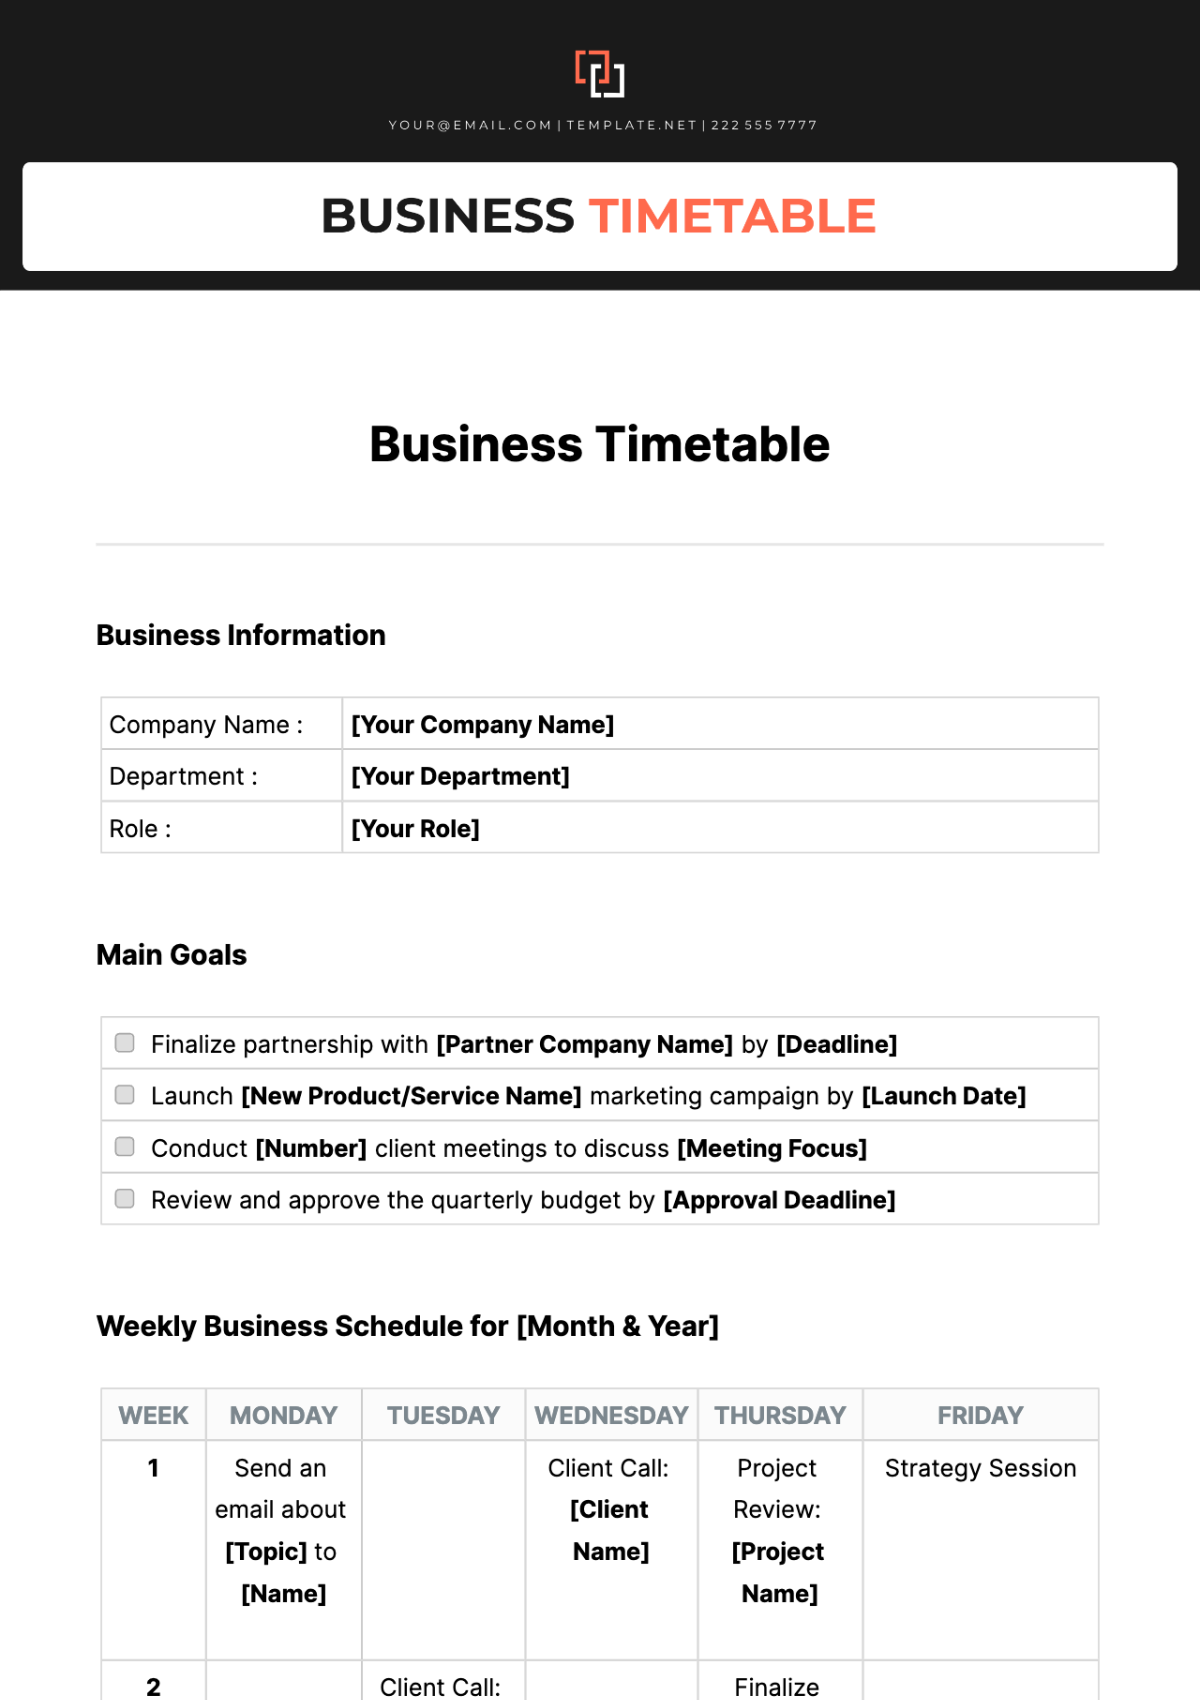 Business Timetable Template